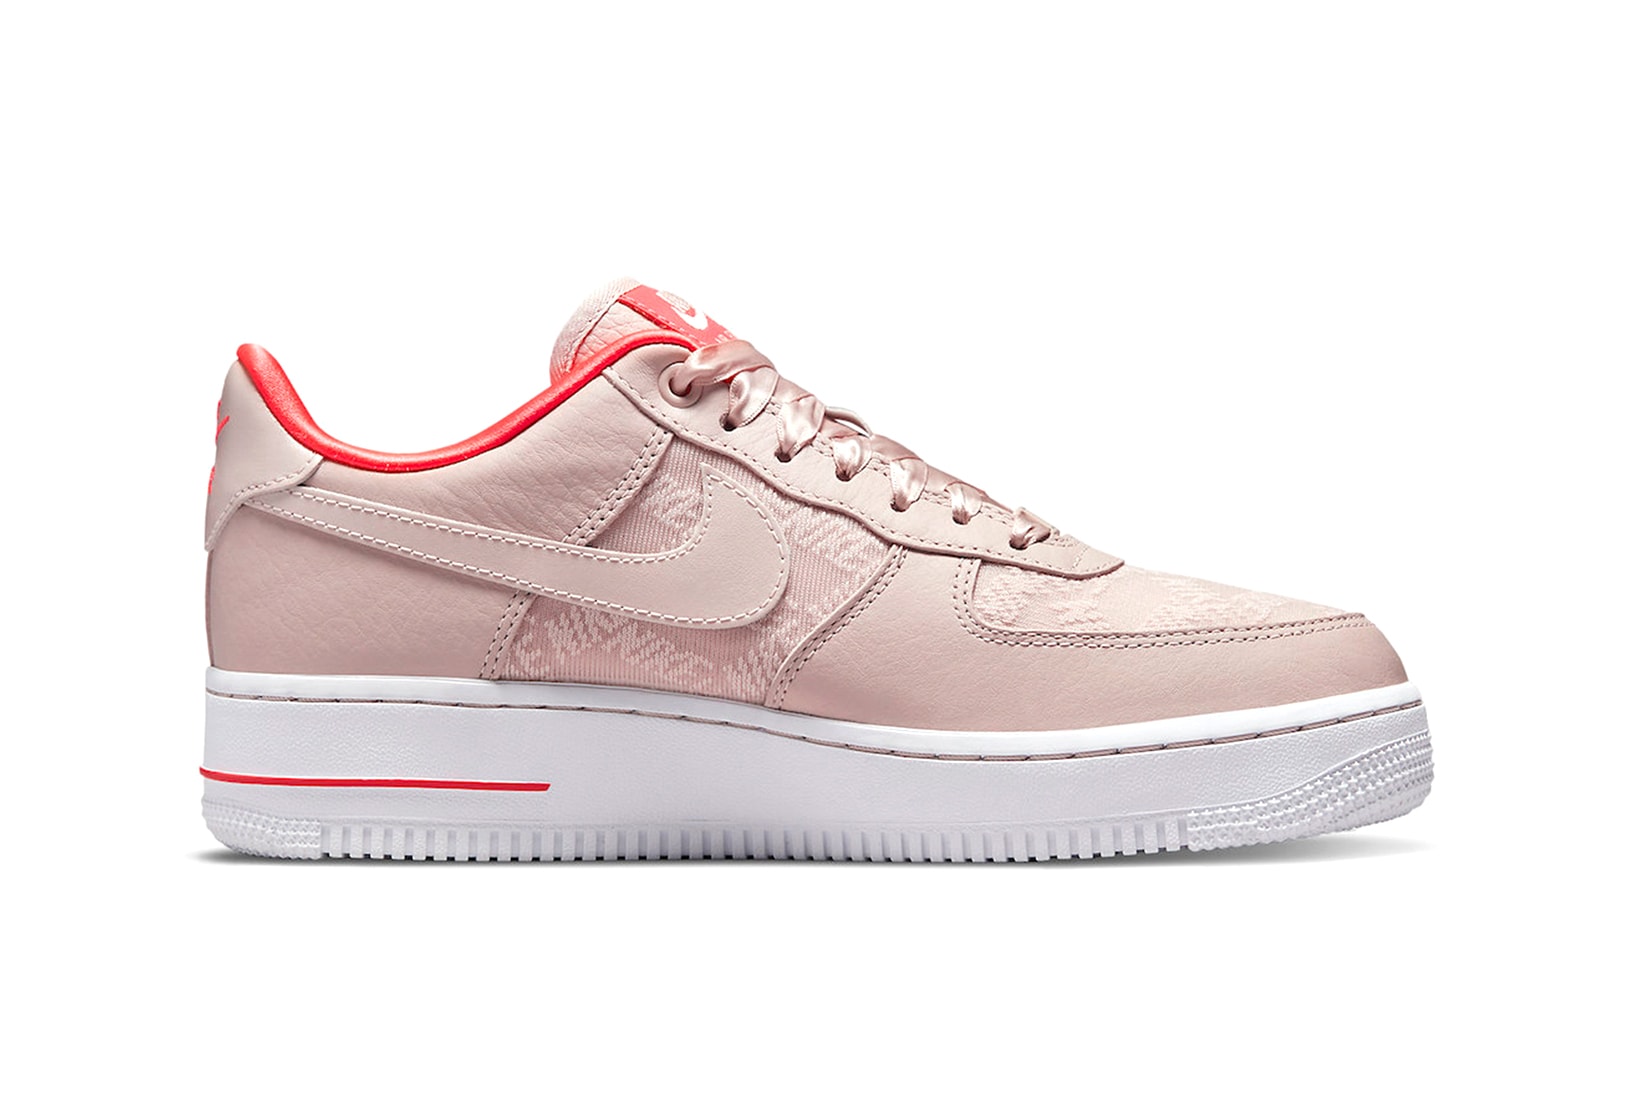 Nike Air Force 1 Low Satin Peach Beige Sneakers Release Info Another Side View